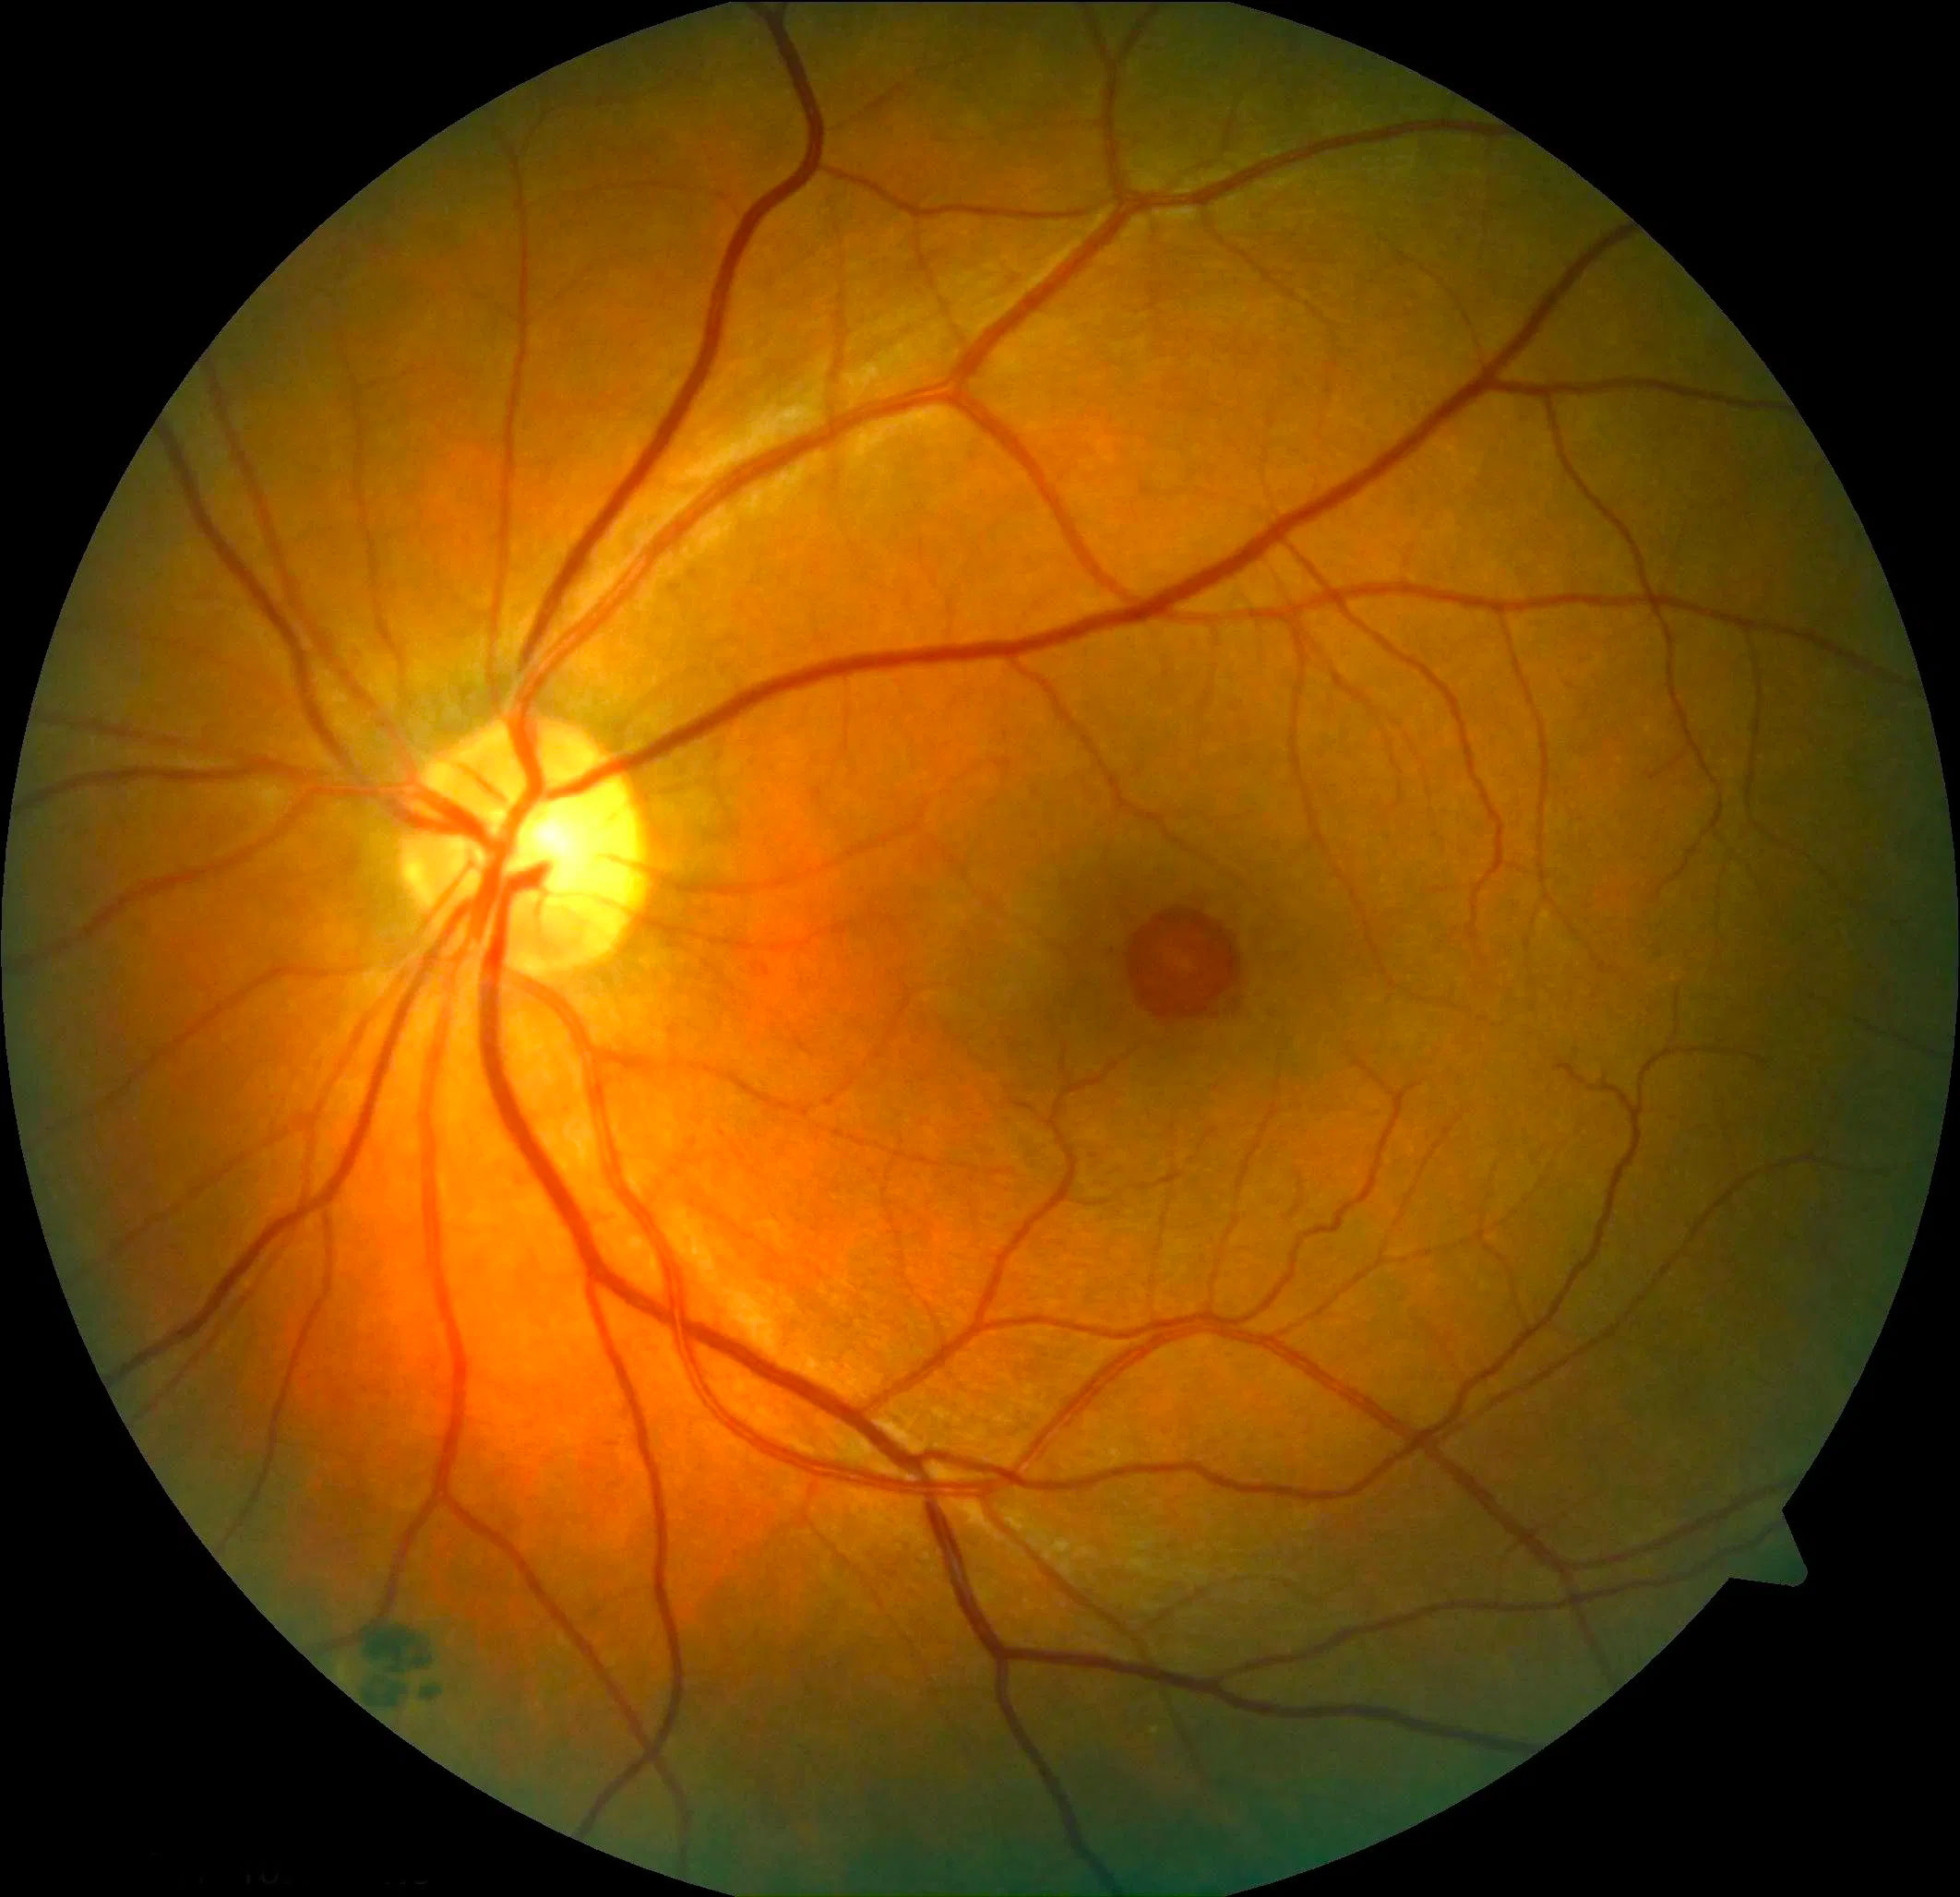 treatment for hole in retina of eye